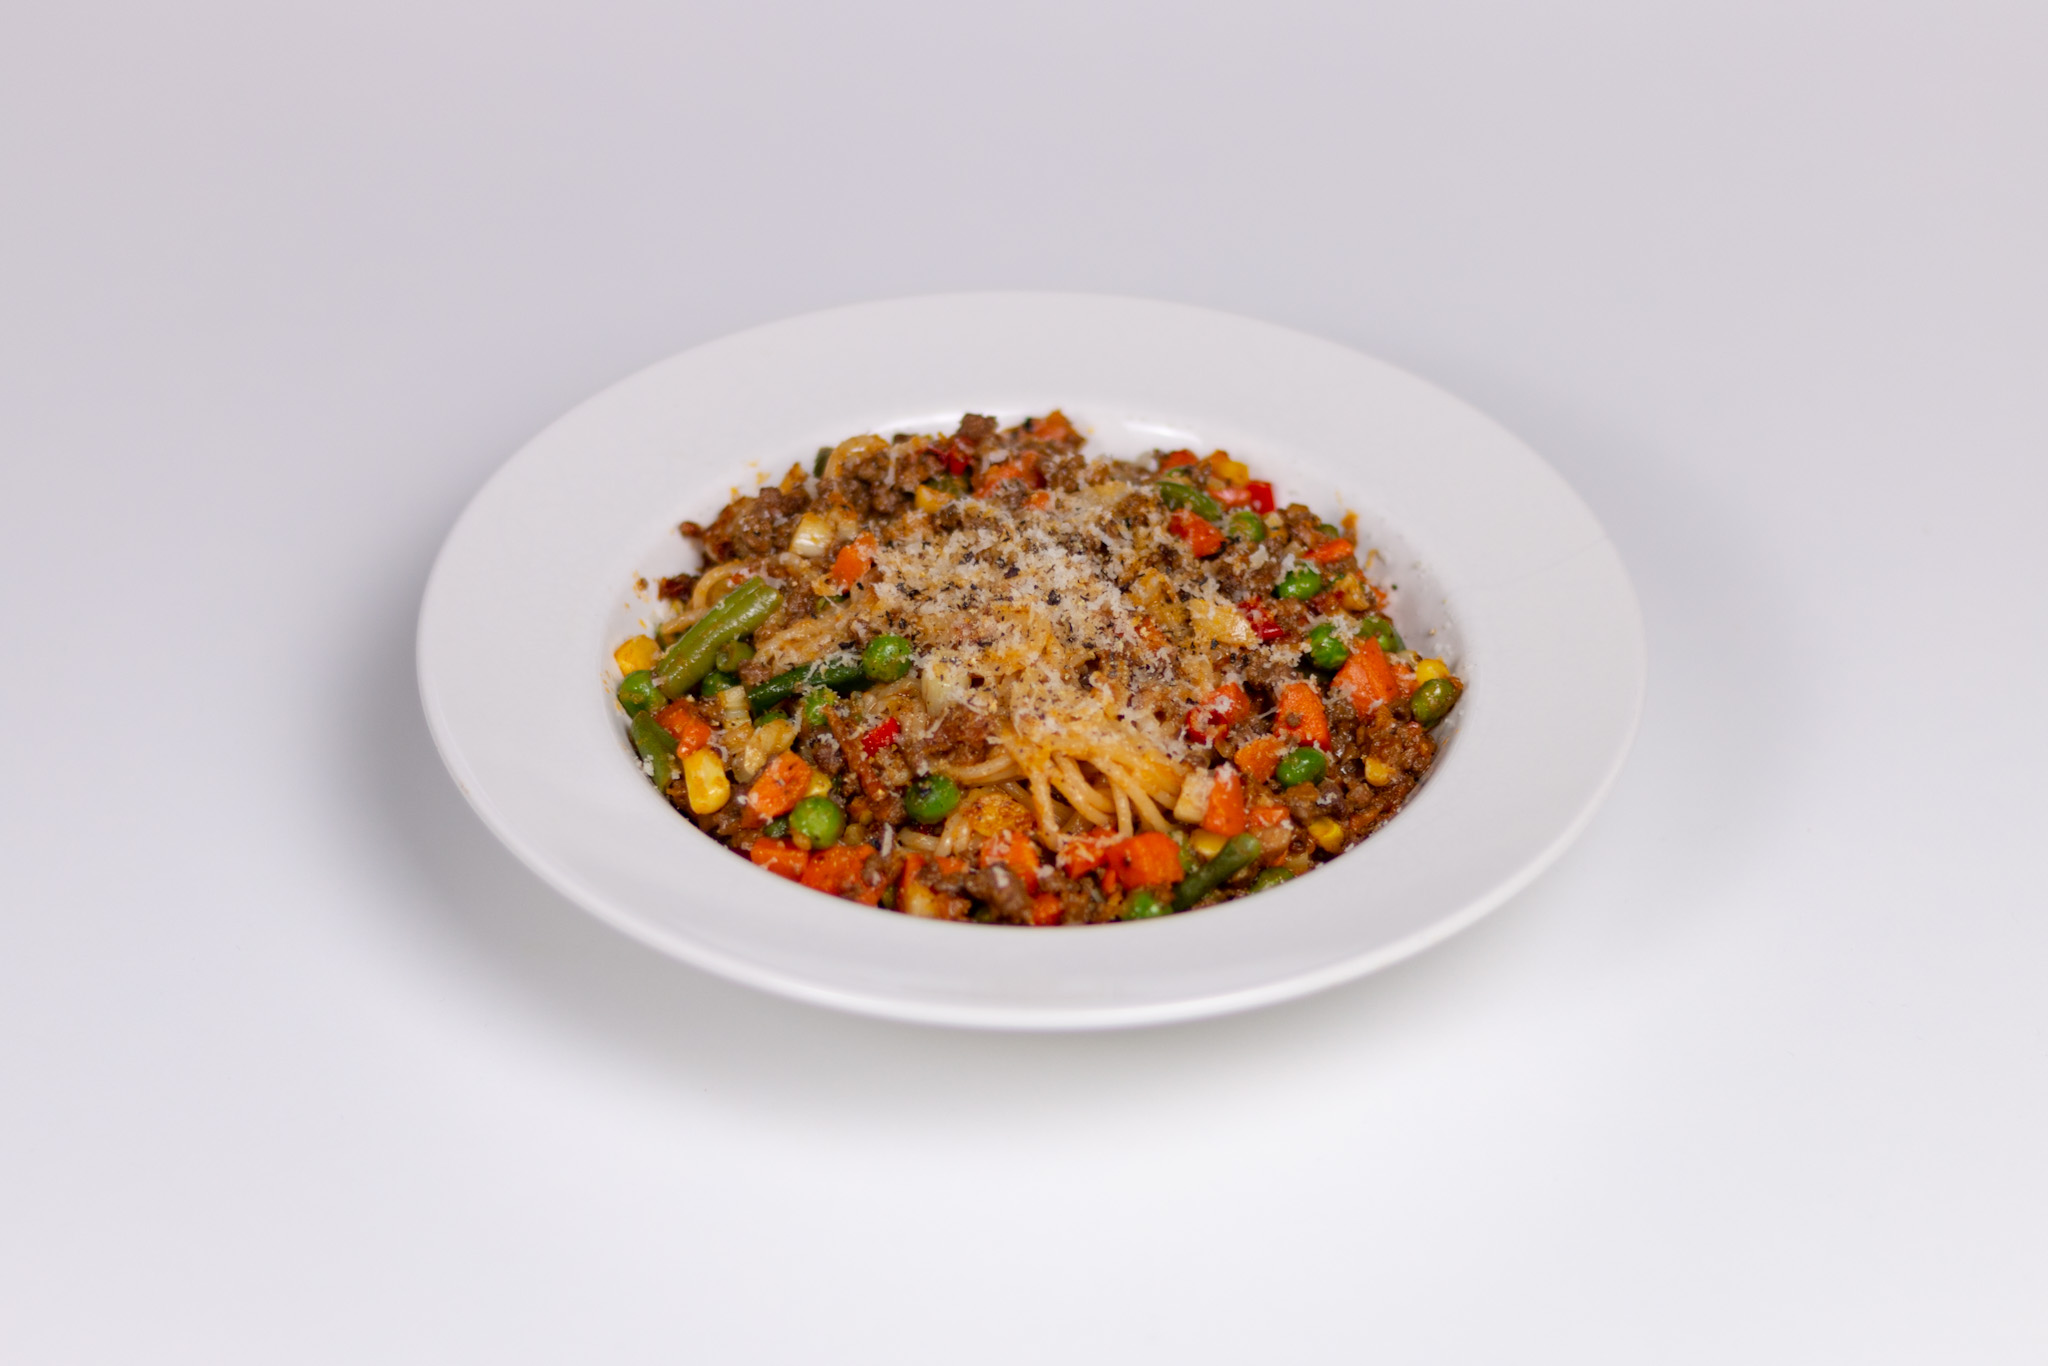 Spaghetti Bolognese with Mixed Vegetables